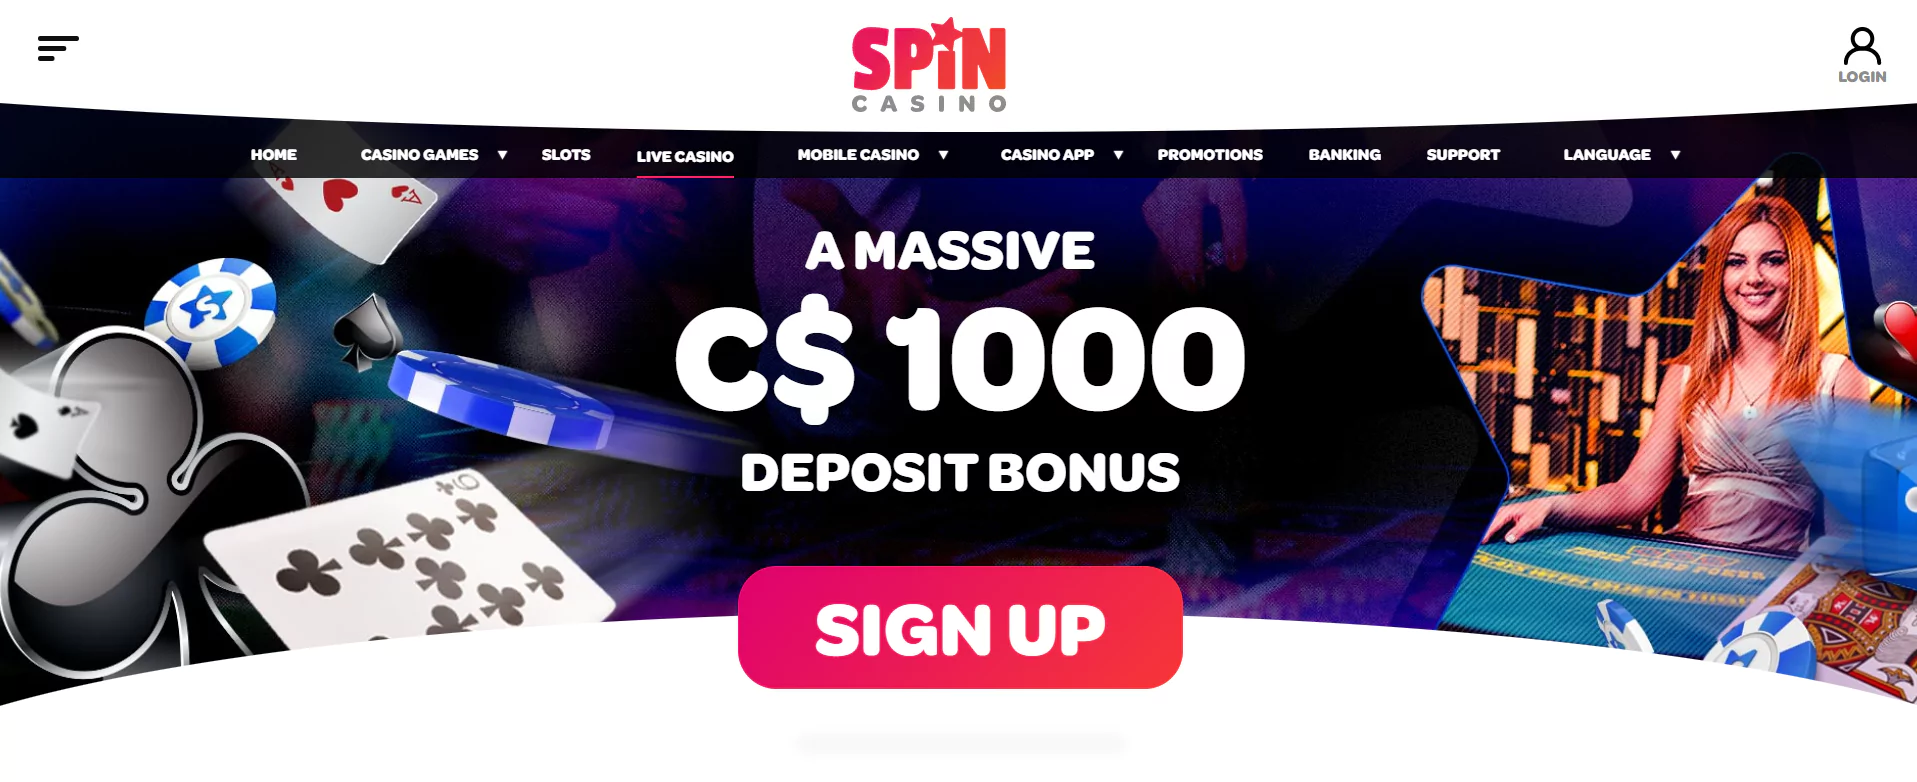 Screenshot of Spin Casino Official Website - New online Casino for Canadian Players